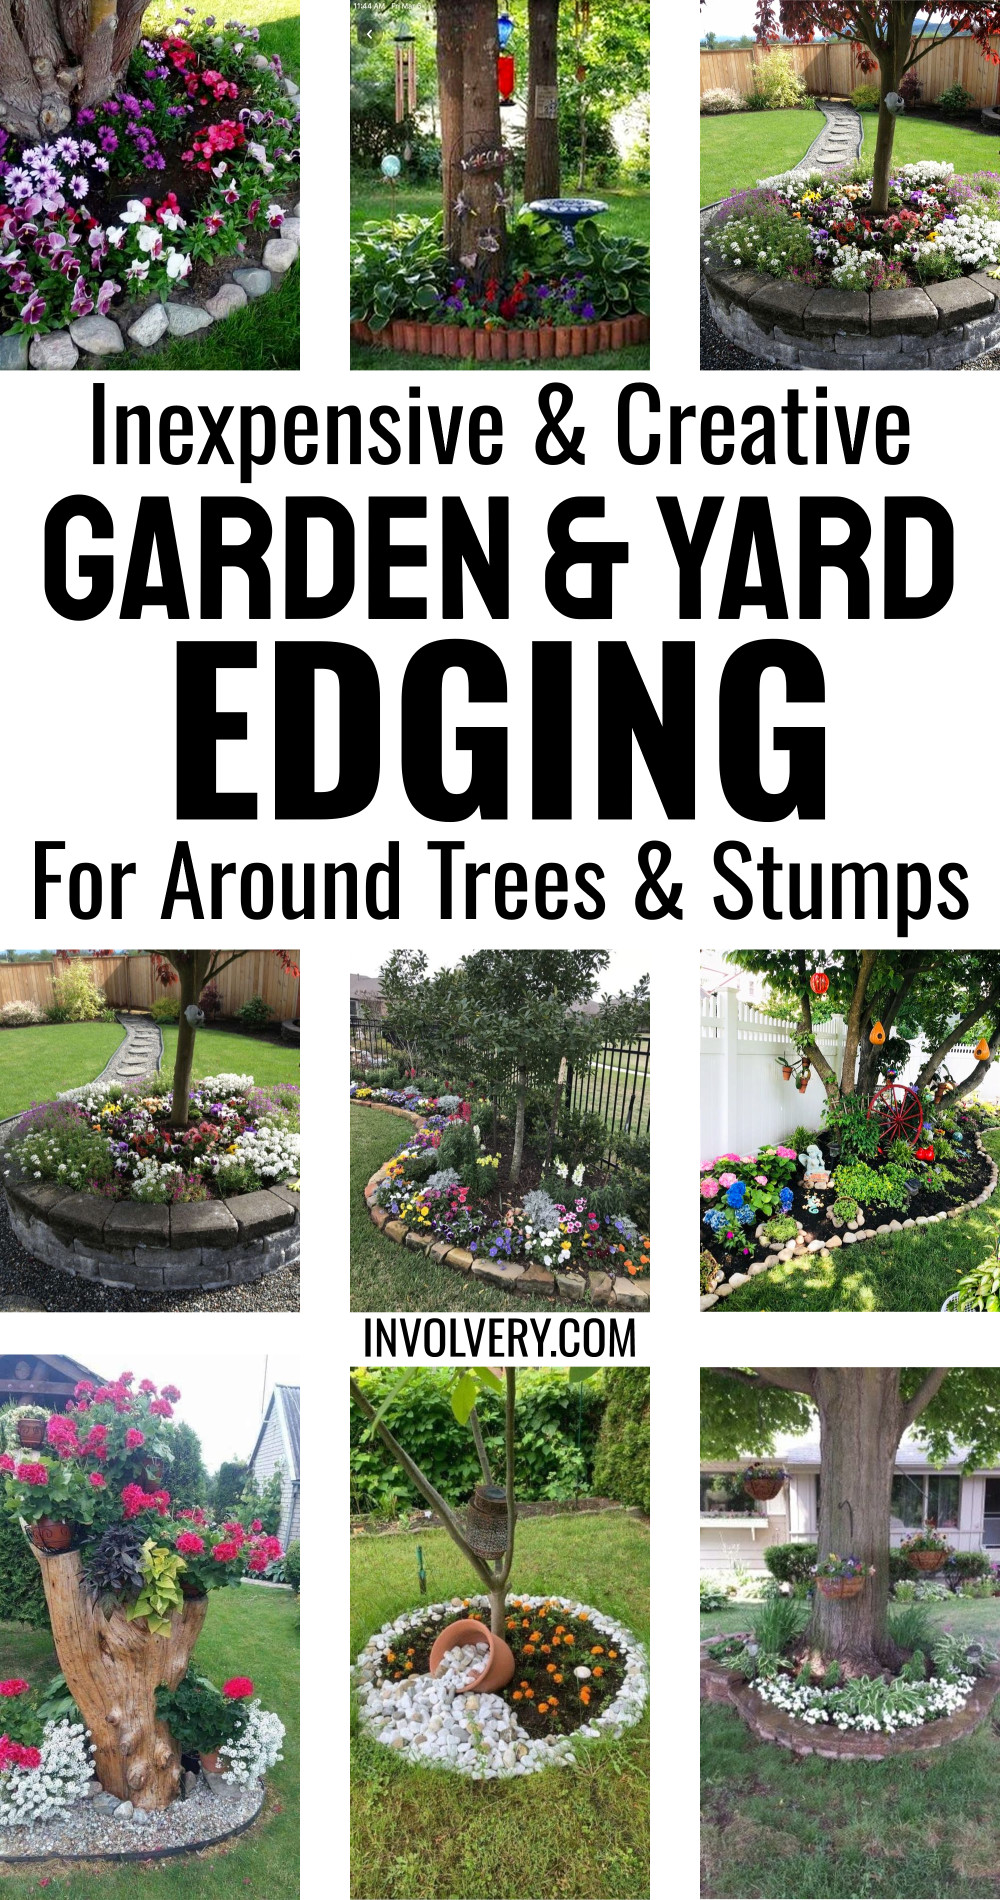 Inexpensive Garden Edging And DIY Borders For Around Trees In Your Yard